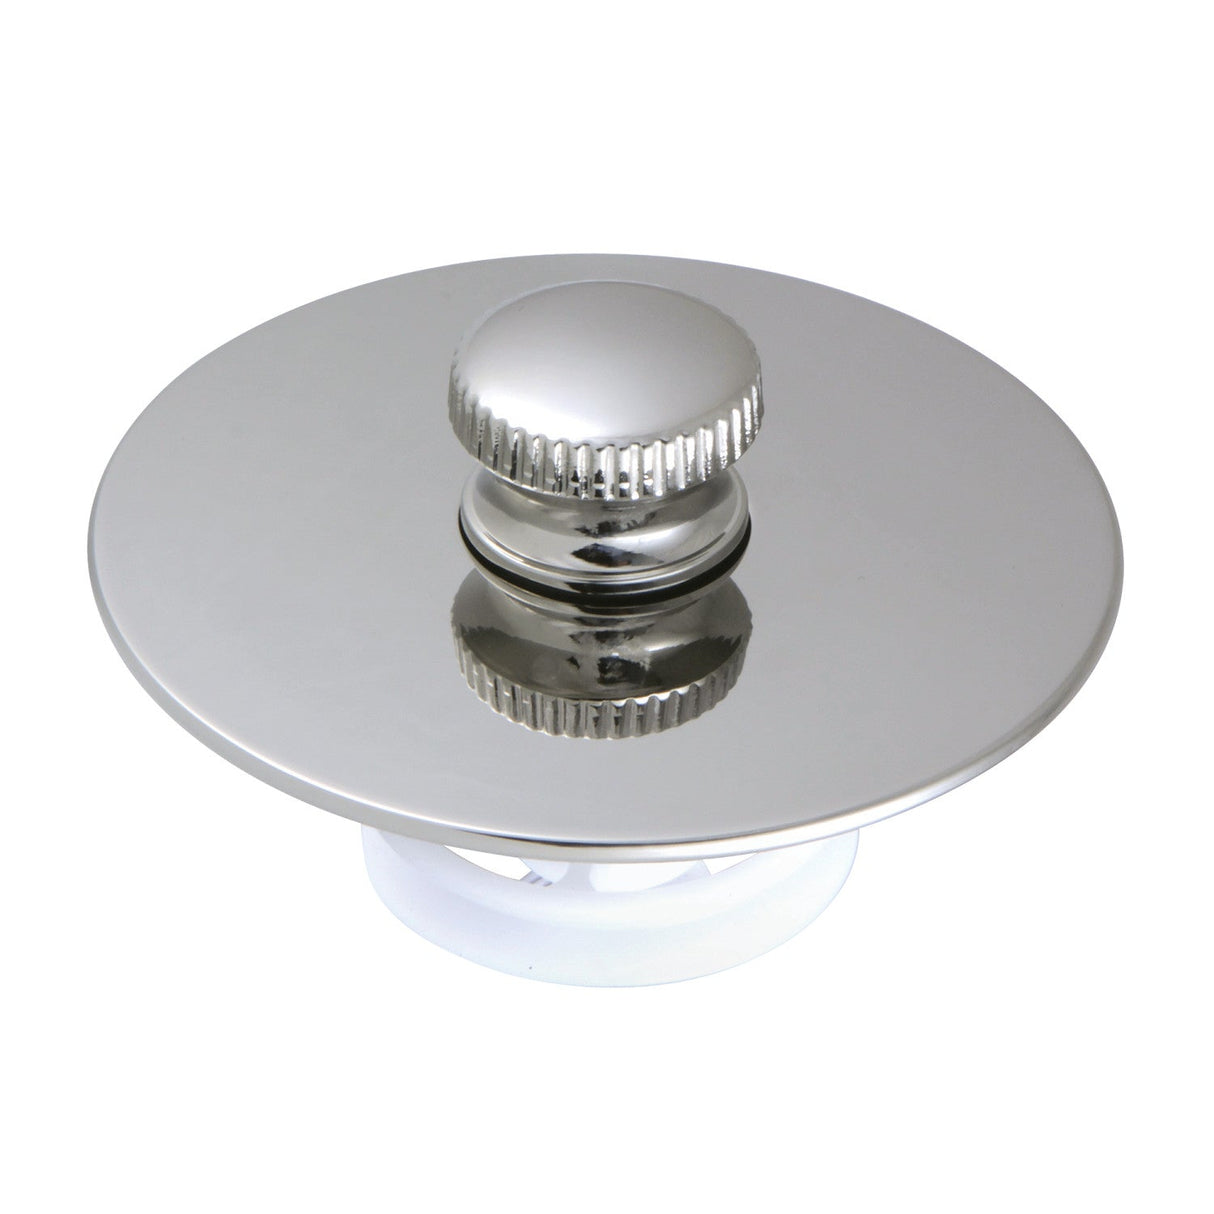 Trimscape DTL5304A6 Universal Cover-Up Tub Drain Stopper, Polished Nickel